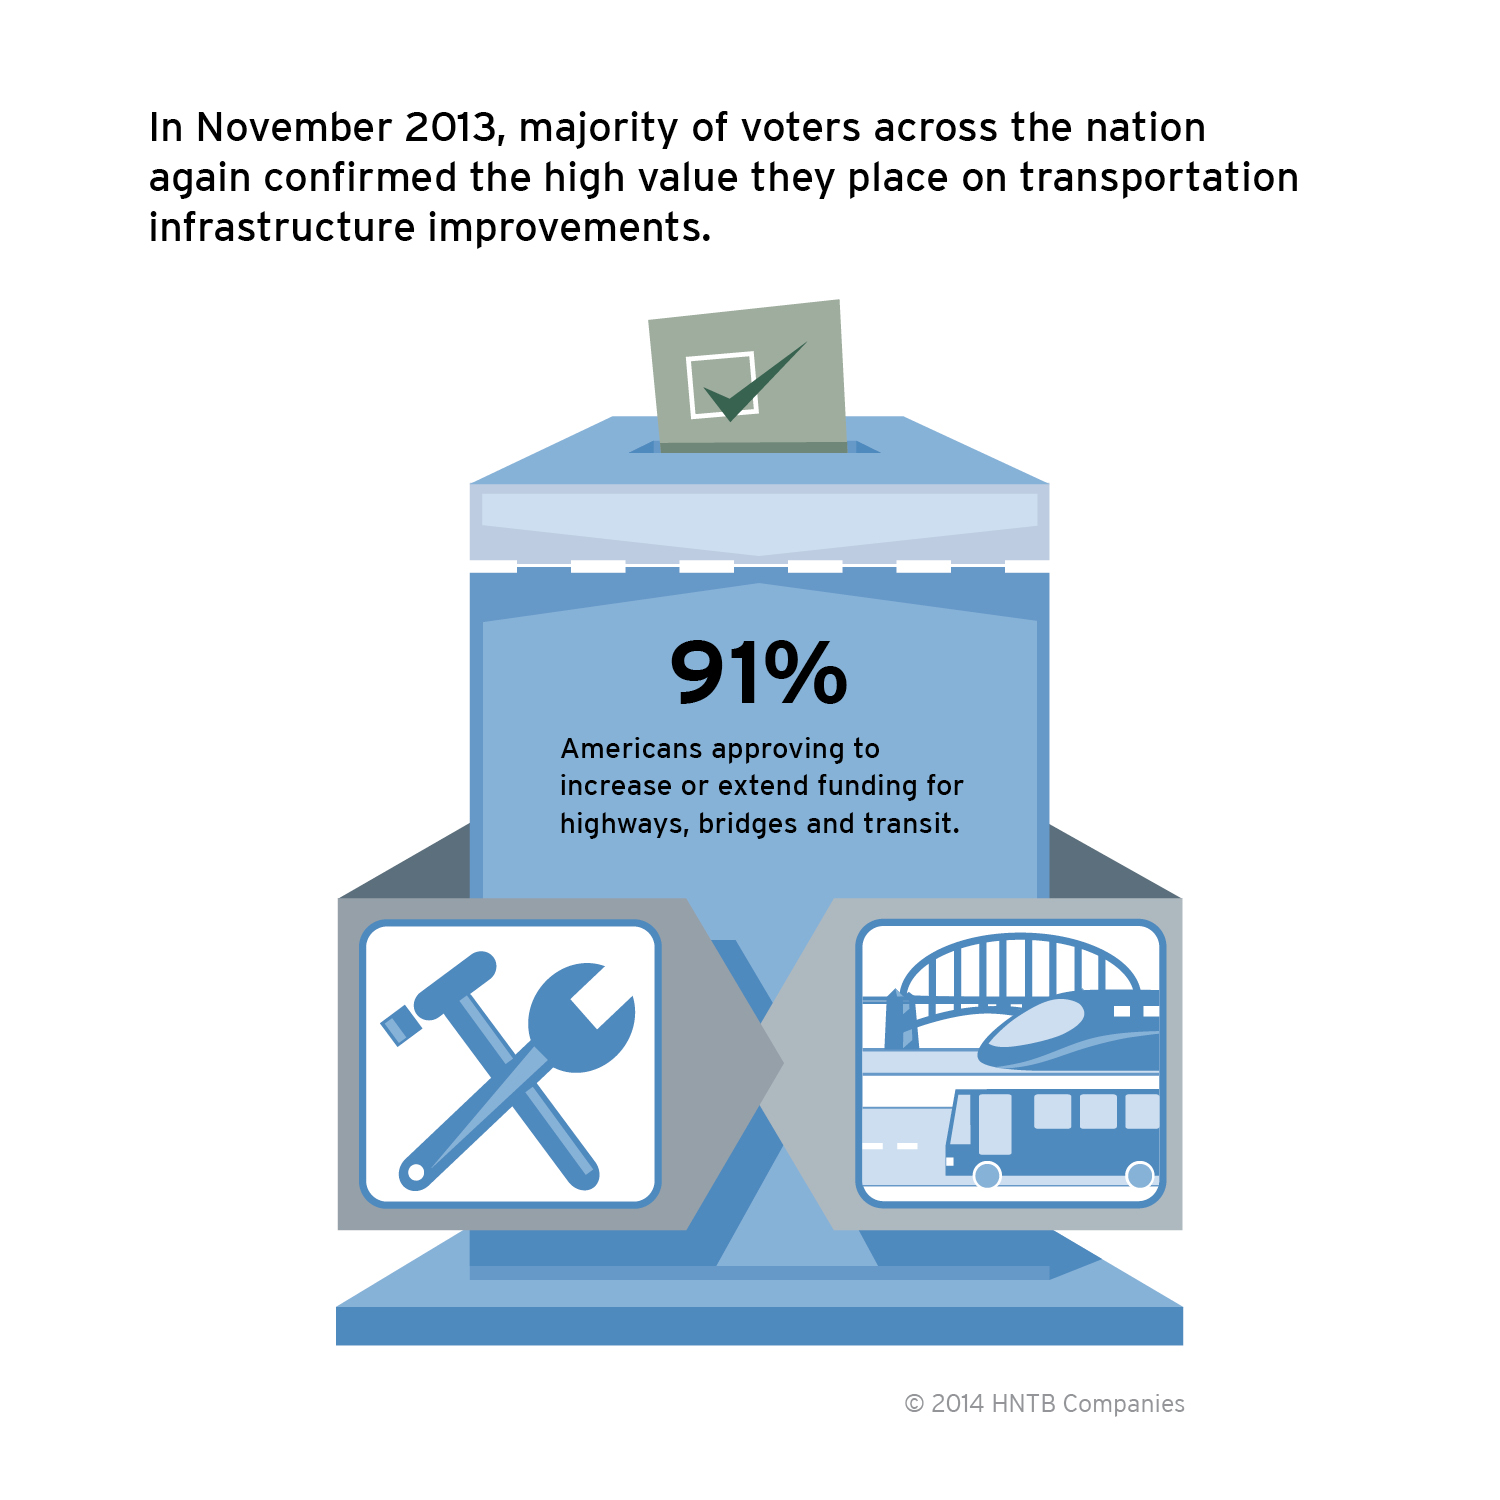 In November 2013, voters approved 91 percent of ballot measures intended to increase or extend funding for highways, bridges and transit.